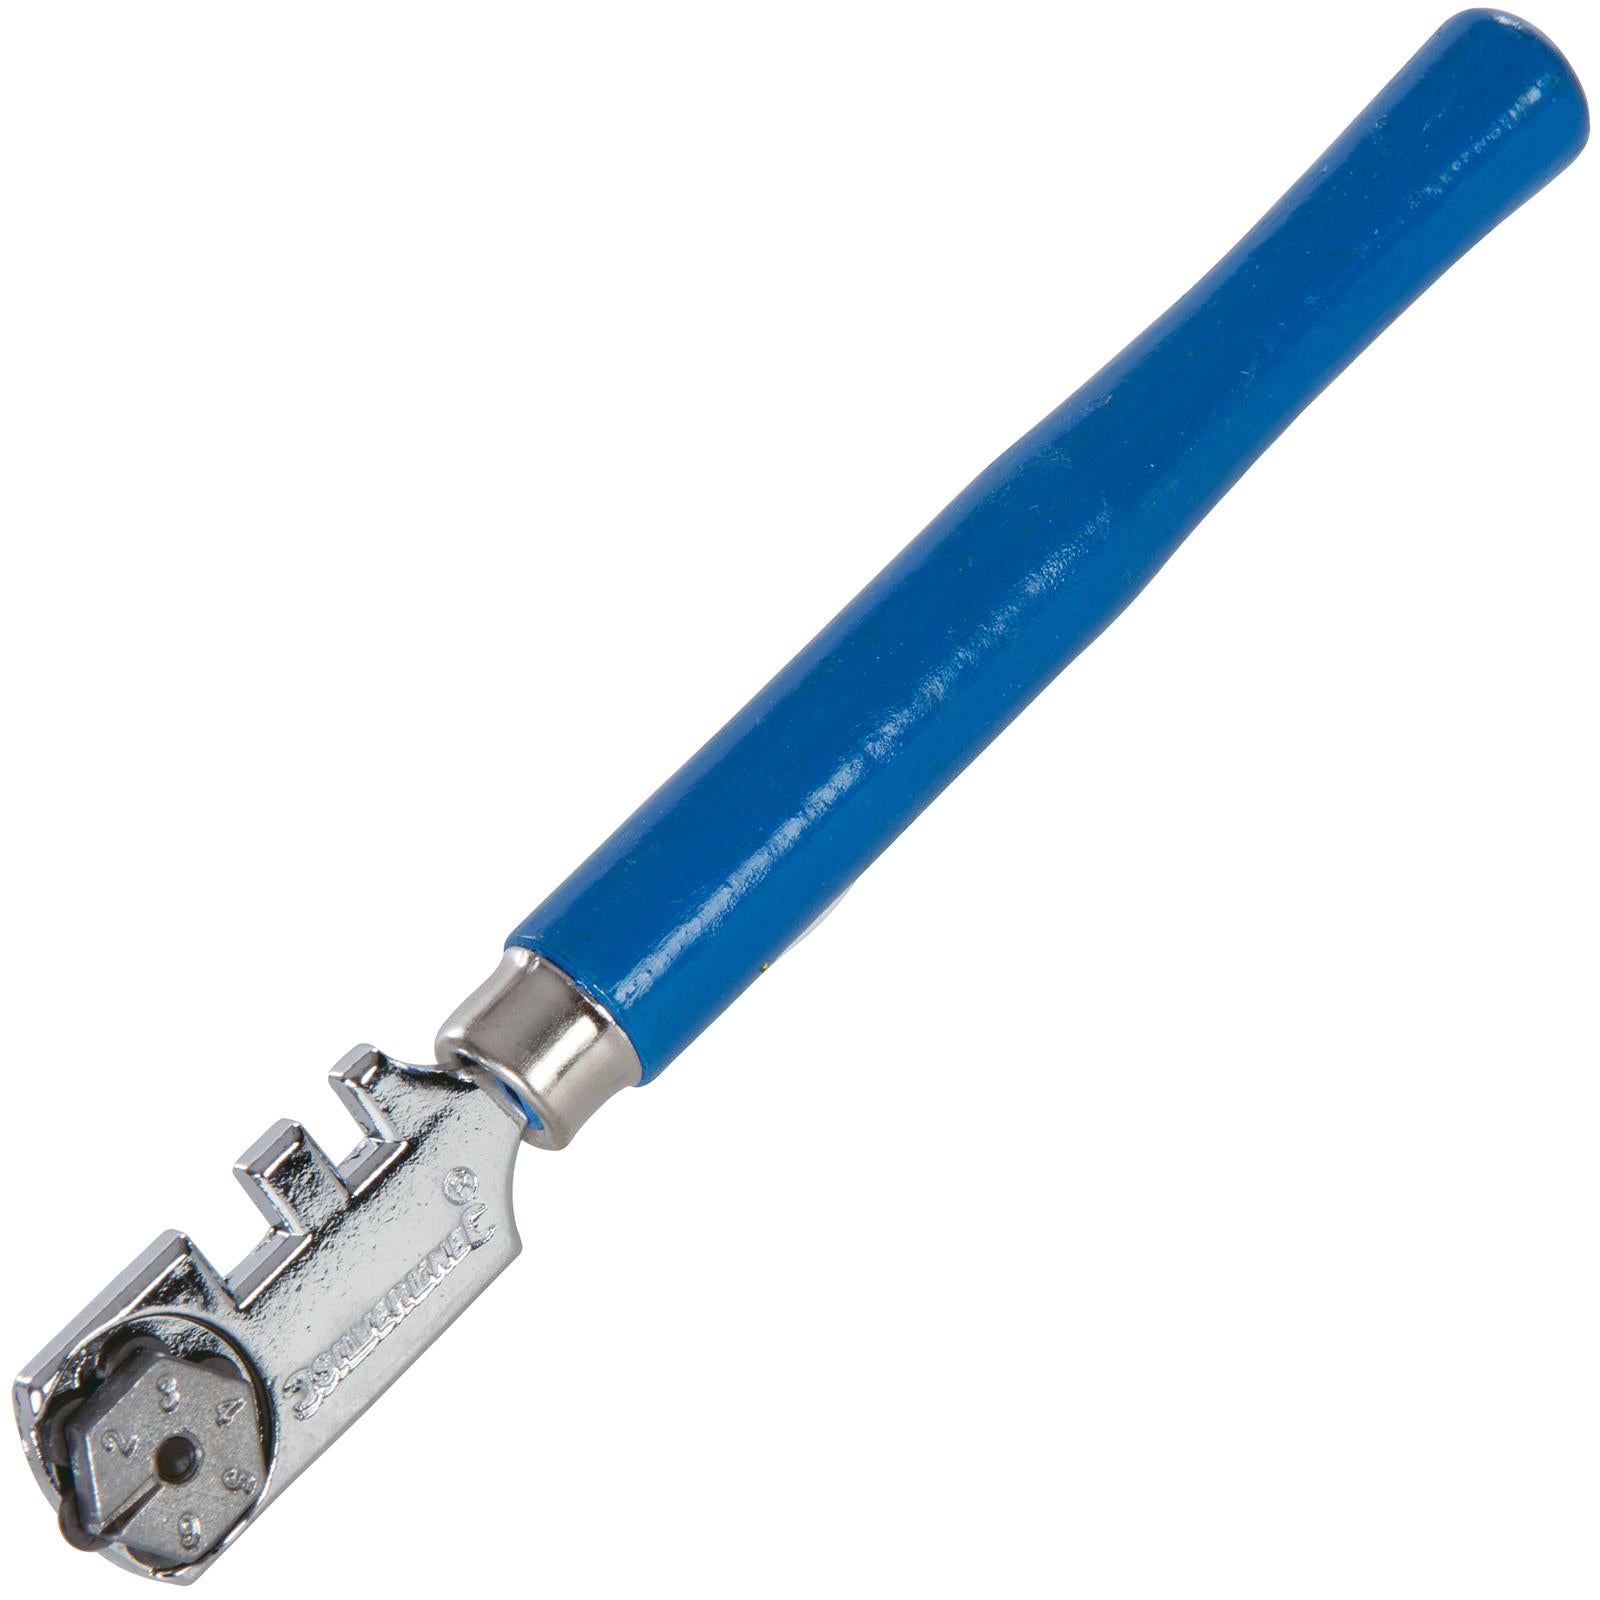 Silverline 125mm 6-Wheel Glass Cutter Snap Off Vice Rotating Turret